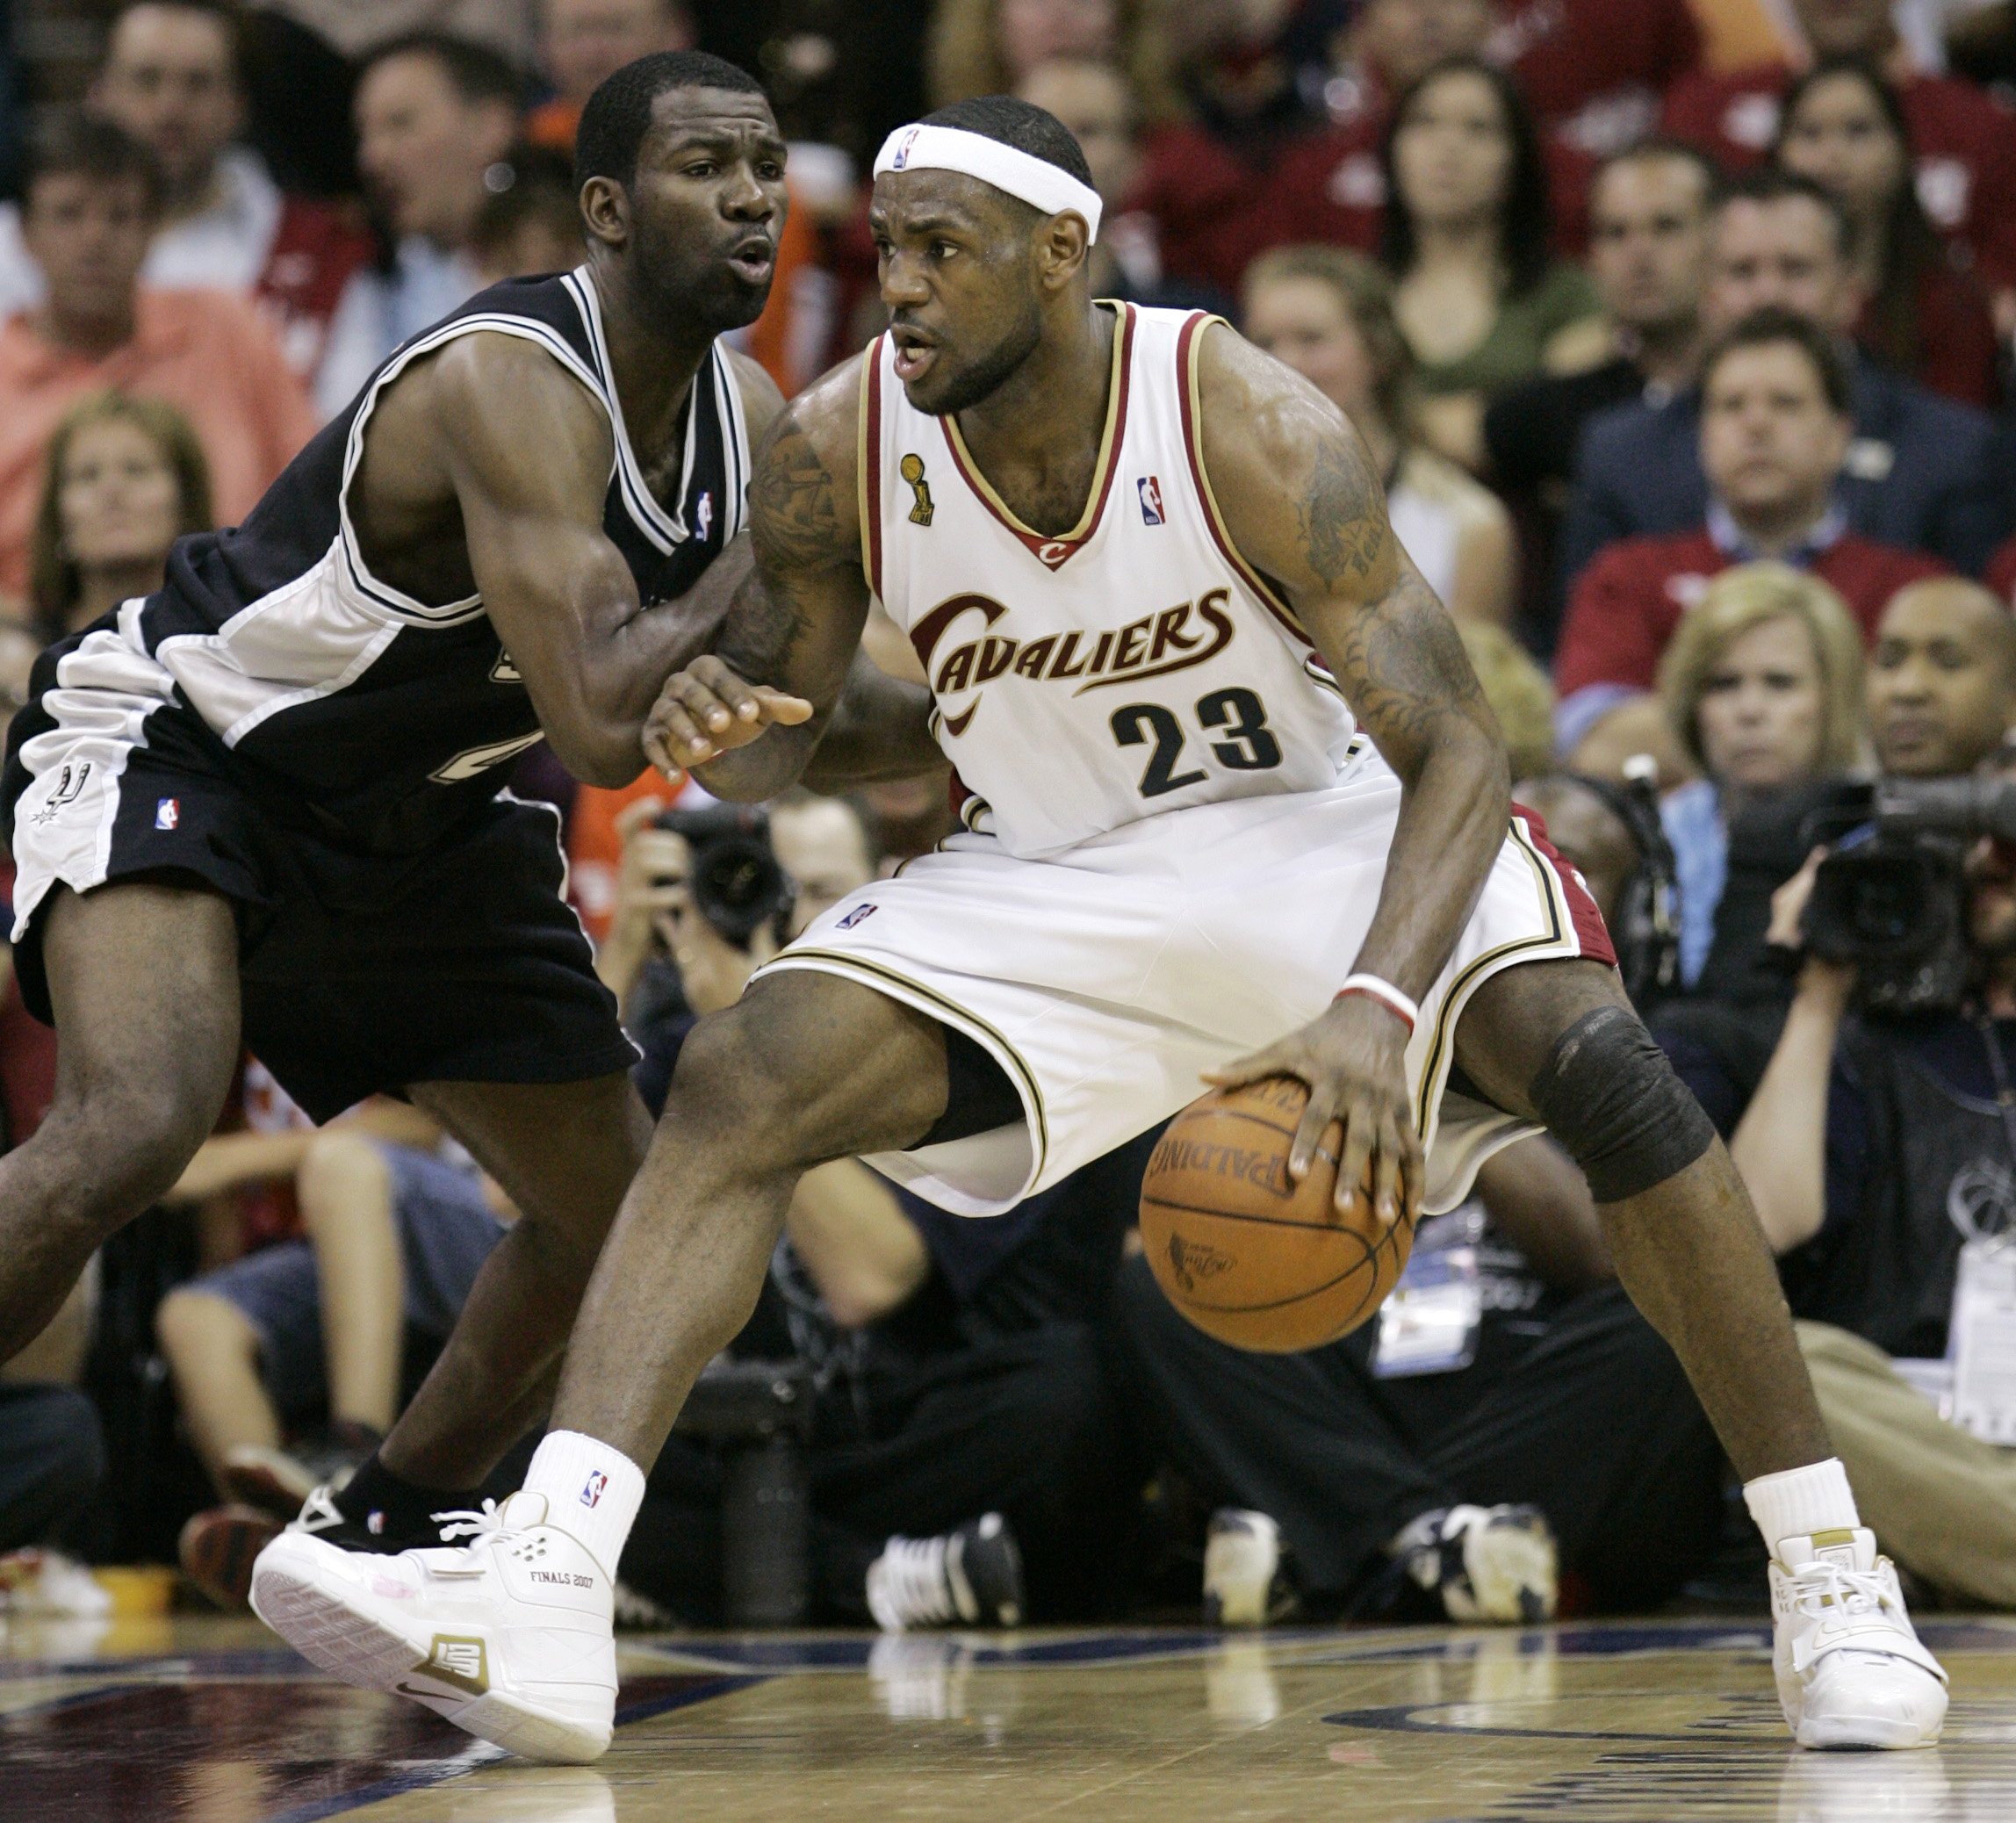 PHOTO: Cleveland Cavaliers' LeBron James drives past San Antonio Spurs' Michael Finley during the second quarter in Game 4 of the NBA basketball finals June 14, 2007, in Cleveland.  